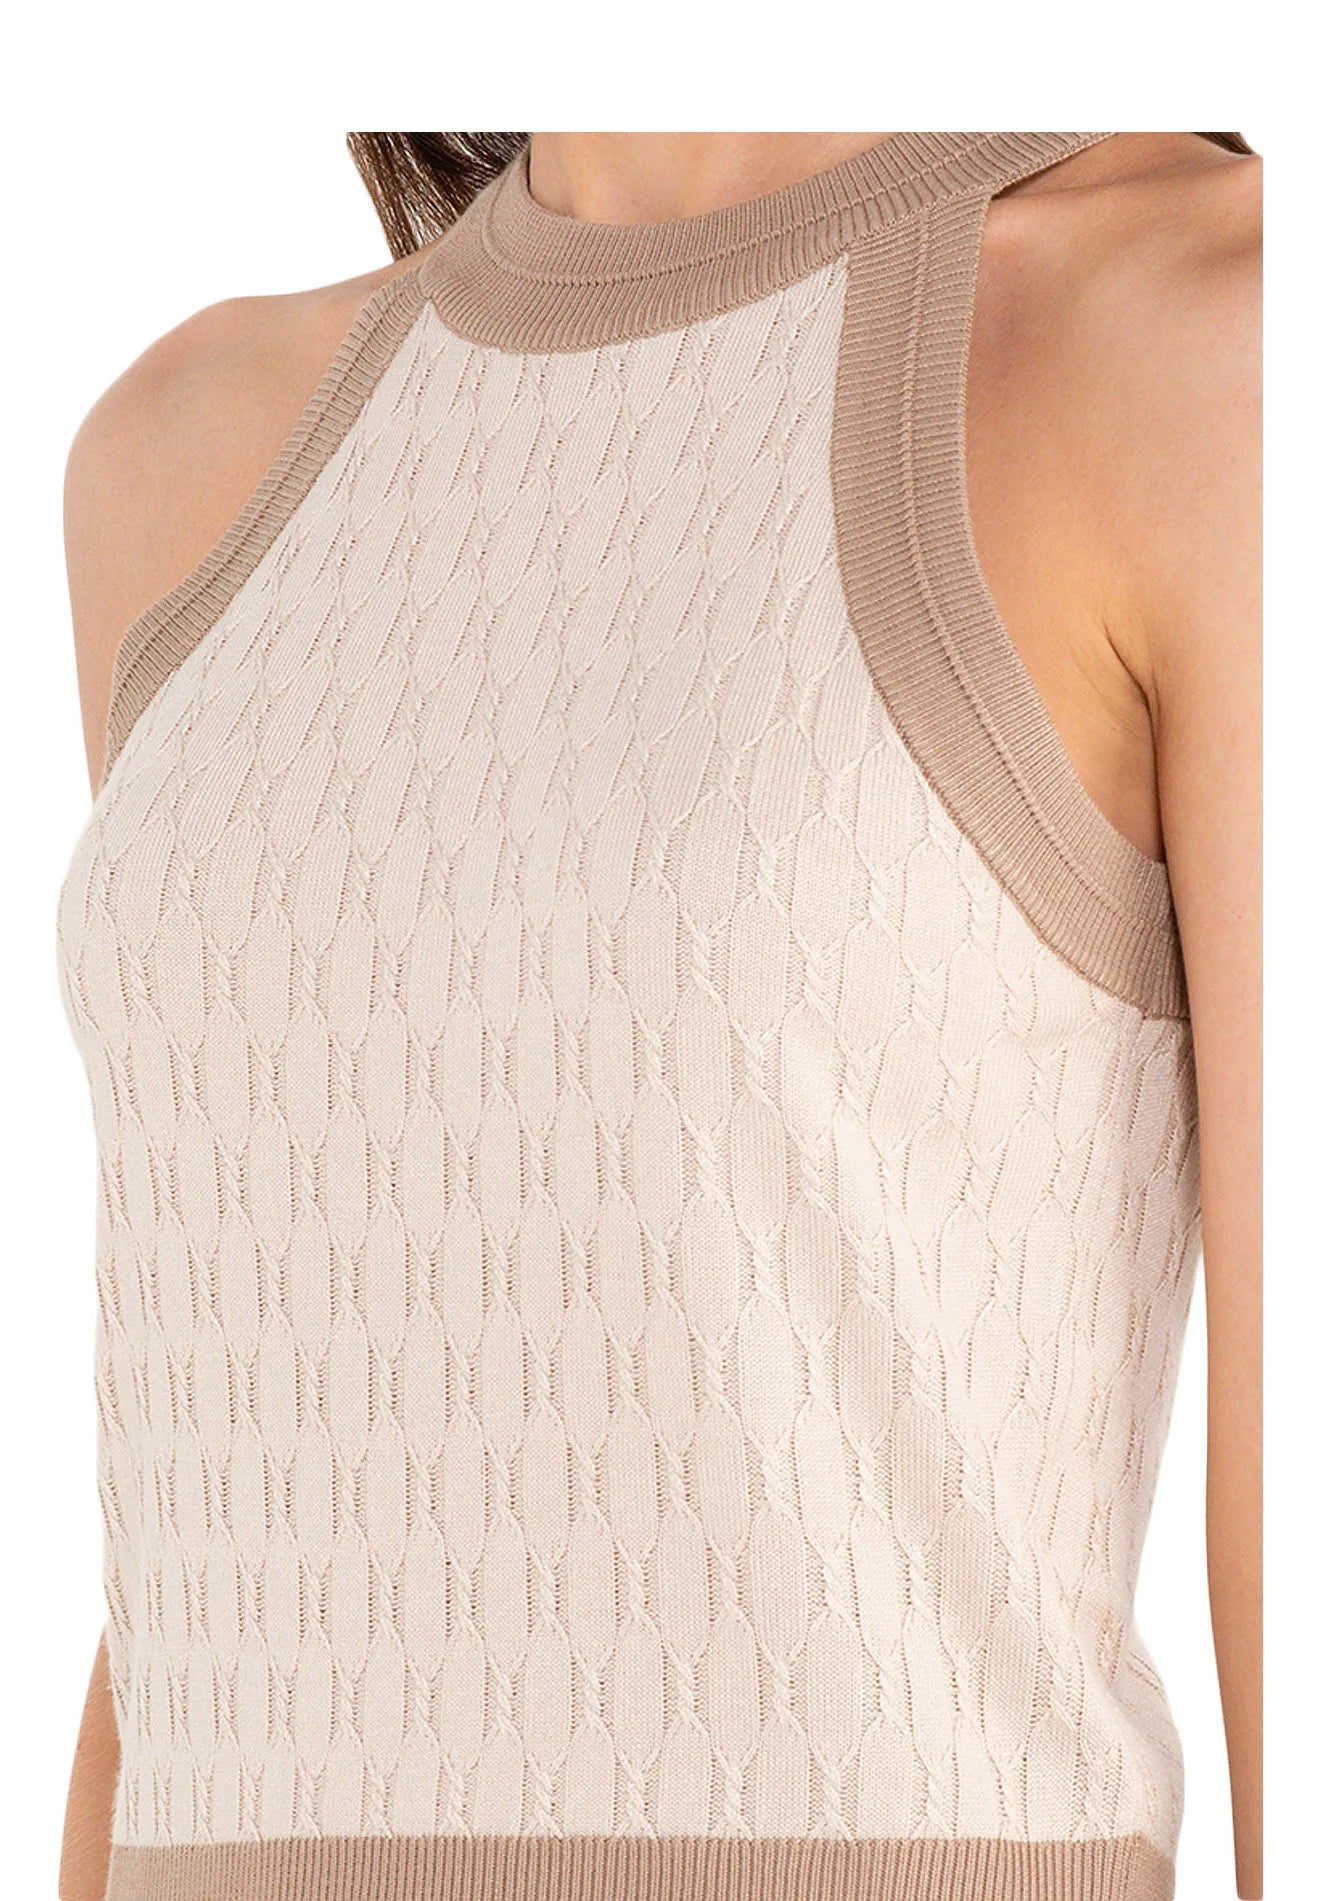 ELLE Apparel Knitted Geometric Top